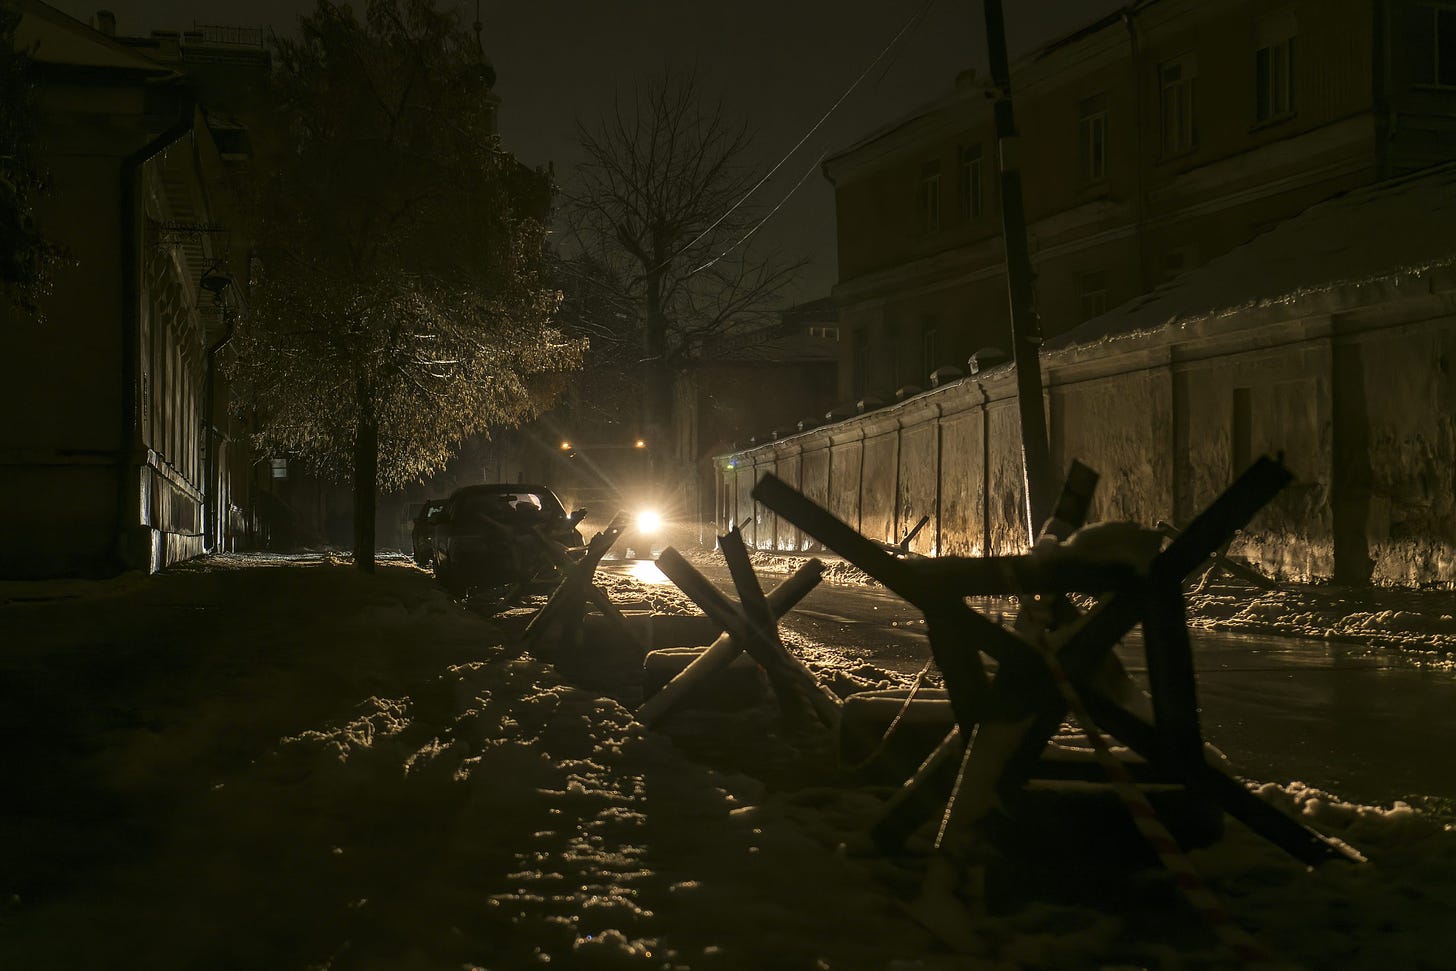 Photo: Street with anti-tank obstacle defense during a blackout after a Russian missile attack on Ukrainian power infrastructure in Kyiv, Ukraine, November, 2022. Credit: Photo by Maxym Marusenko/NurPhoto